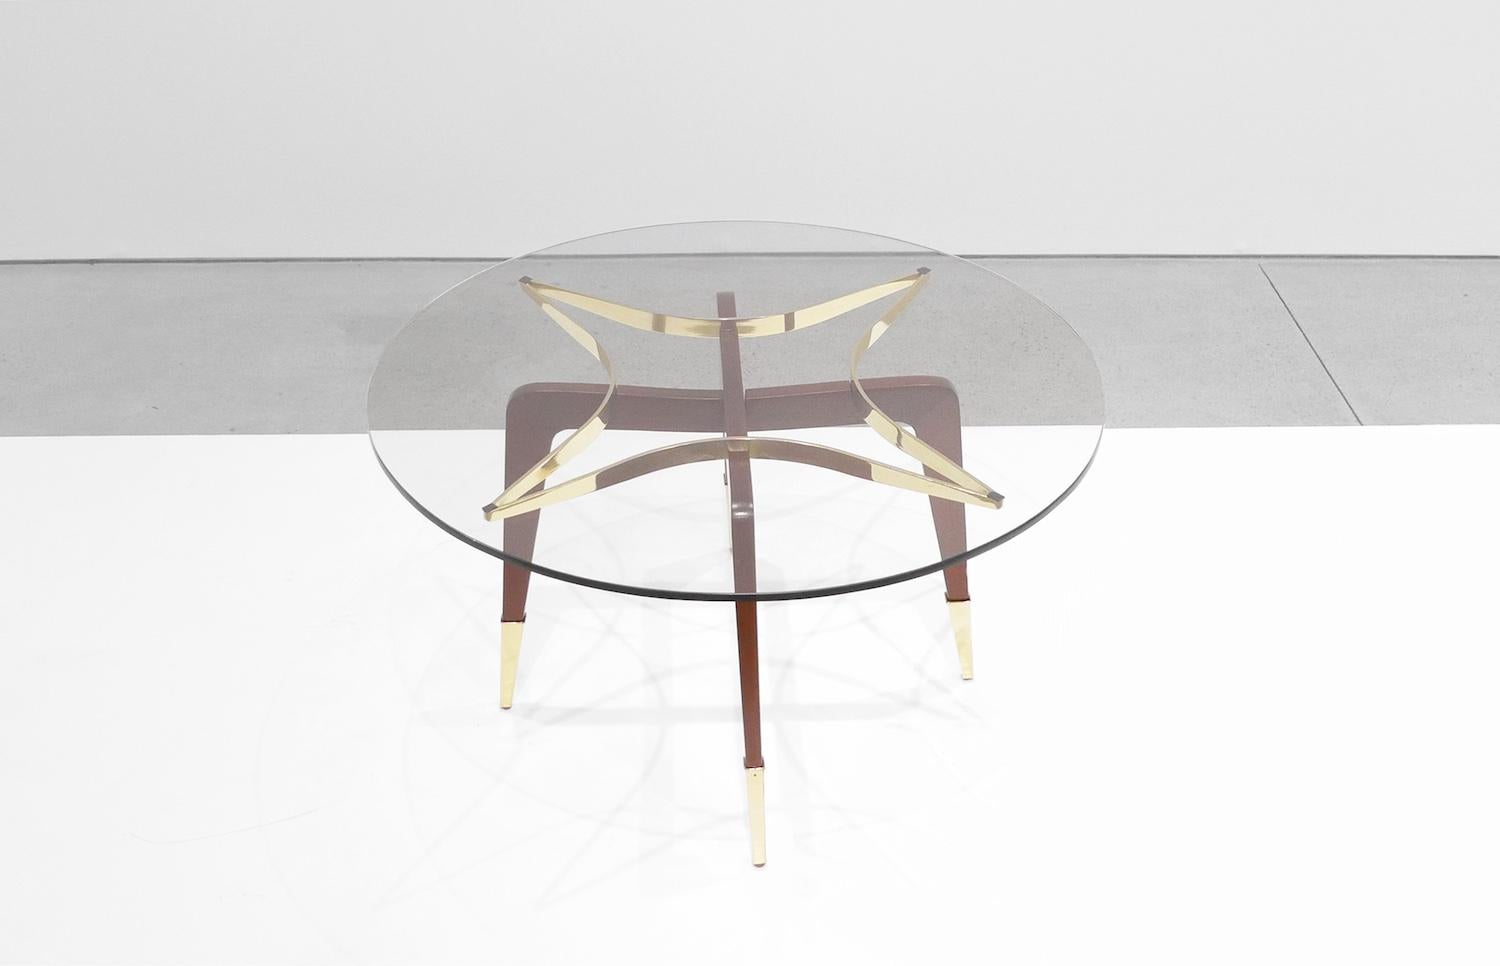 Paolo Buffa coffee table with brass star frame feature that supports circular glass top. Long decorative brass feet.
Italy, circa 1950s

Meticulously restored and in excellent condition.

